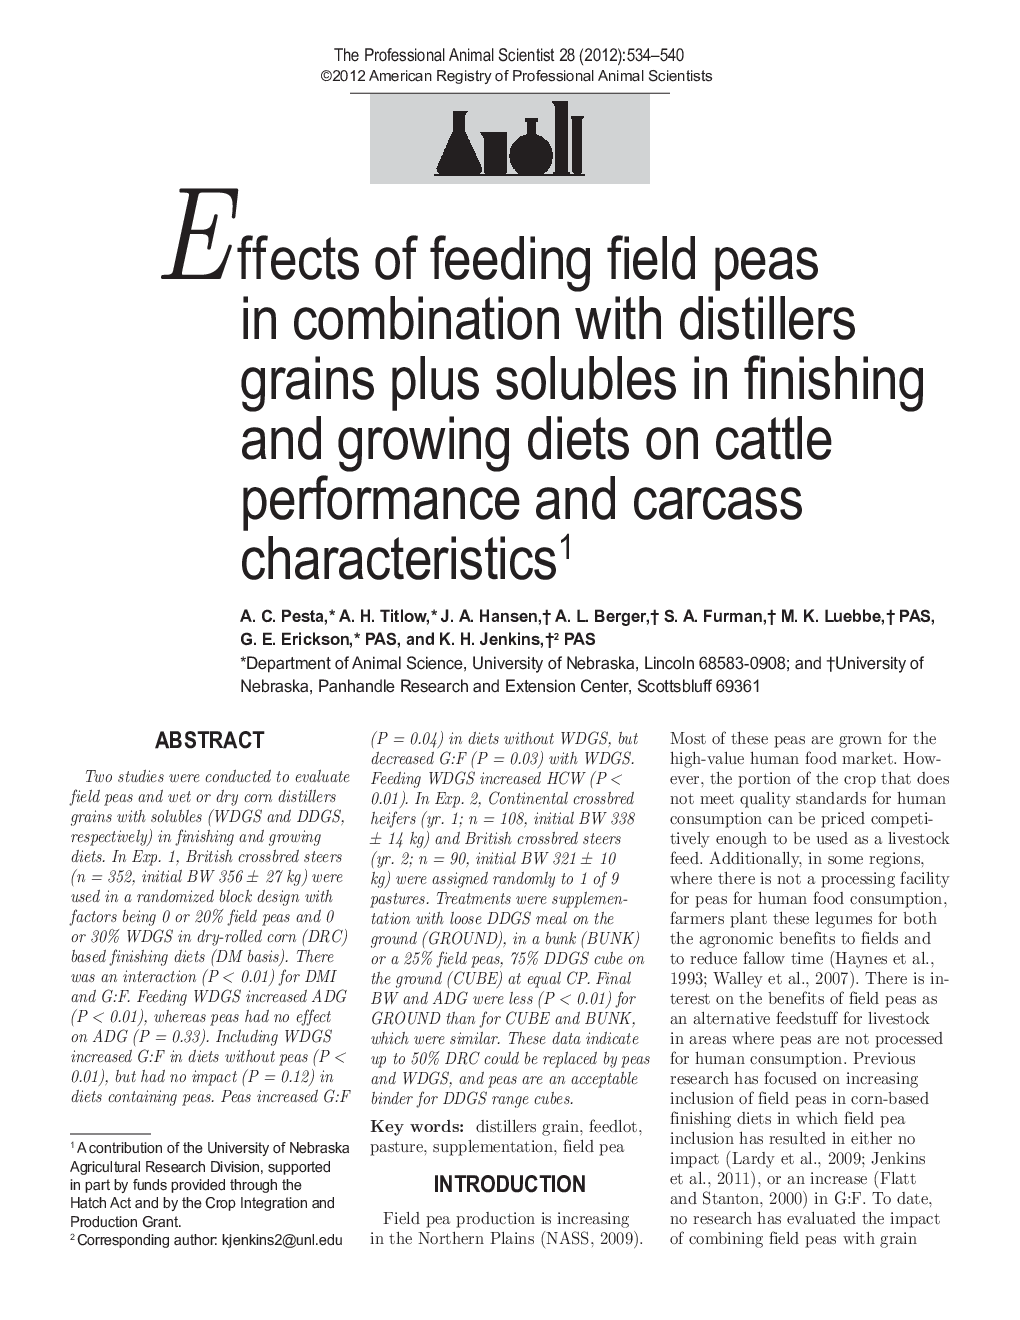 Effects of feeding field peas in combination with distillers grains plus solubles in finishing and growing diets on cattle performance and carcass characteristics1